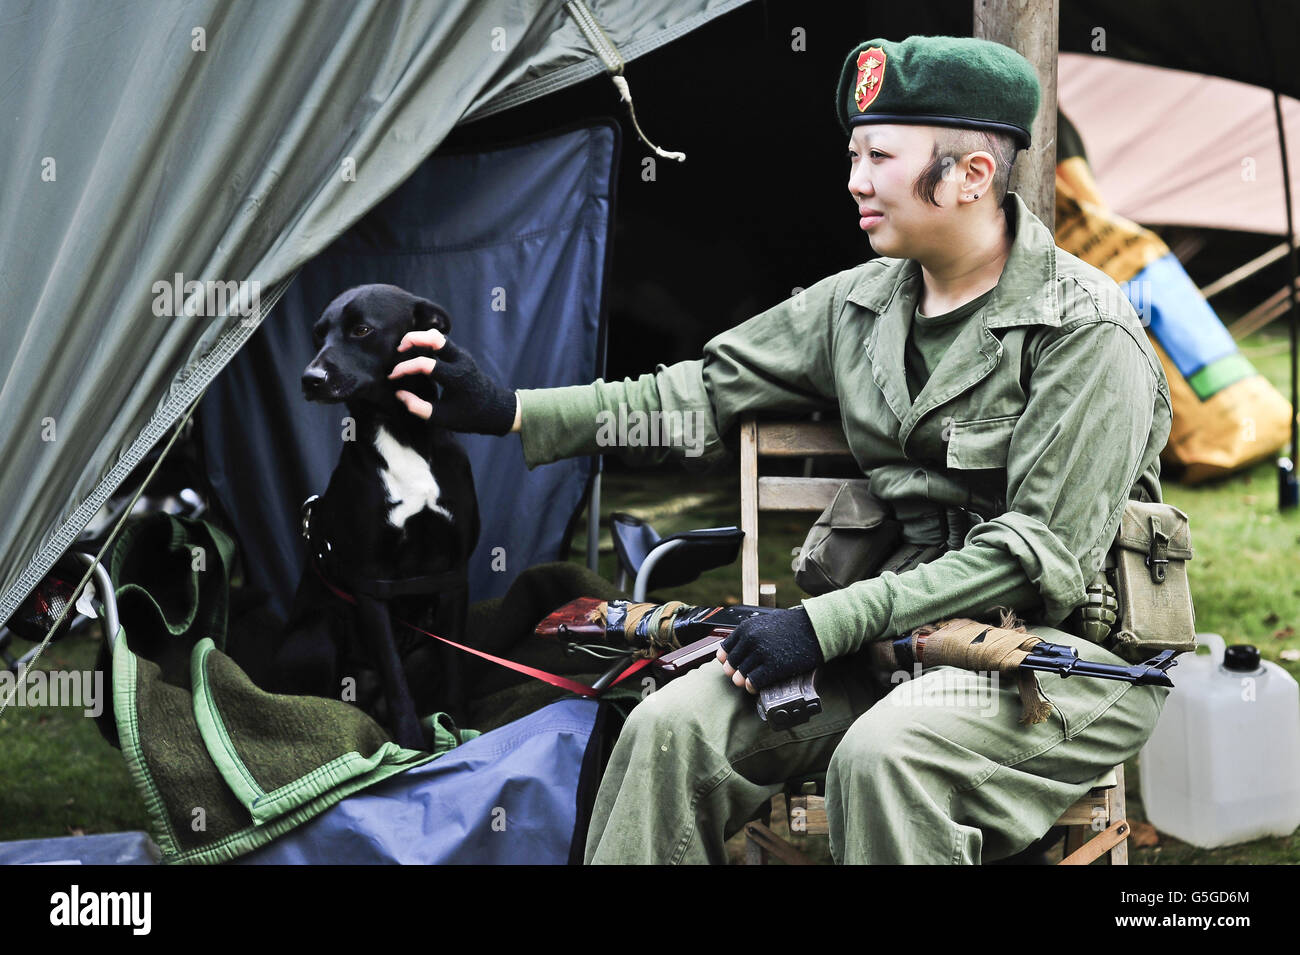 STANDALONE Photo. A woman in period military uniform pats a dog while taking time out from a military display at the WWII Weekend at Castle Drogo in Devon. Stock Photo